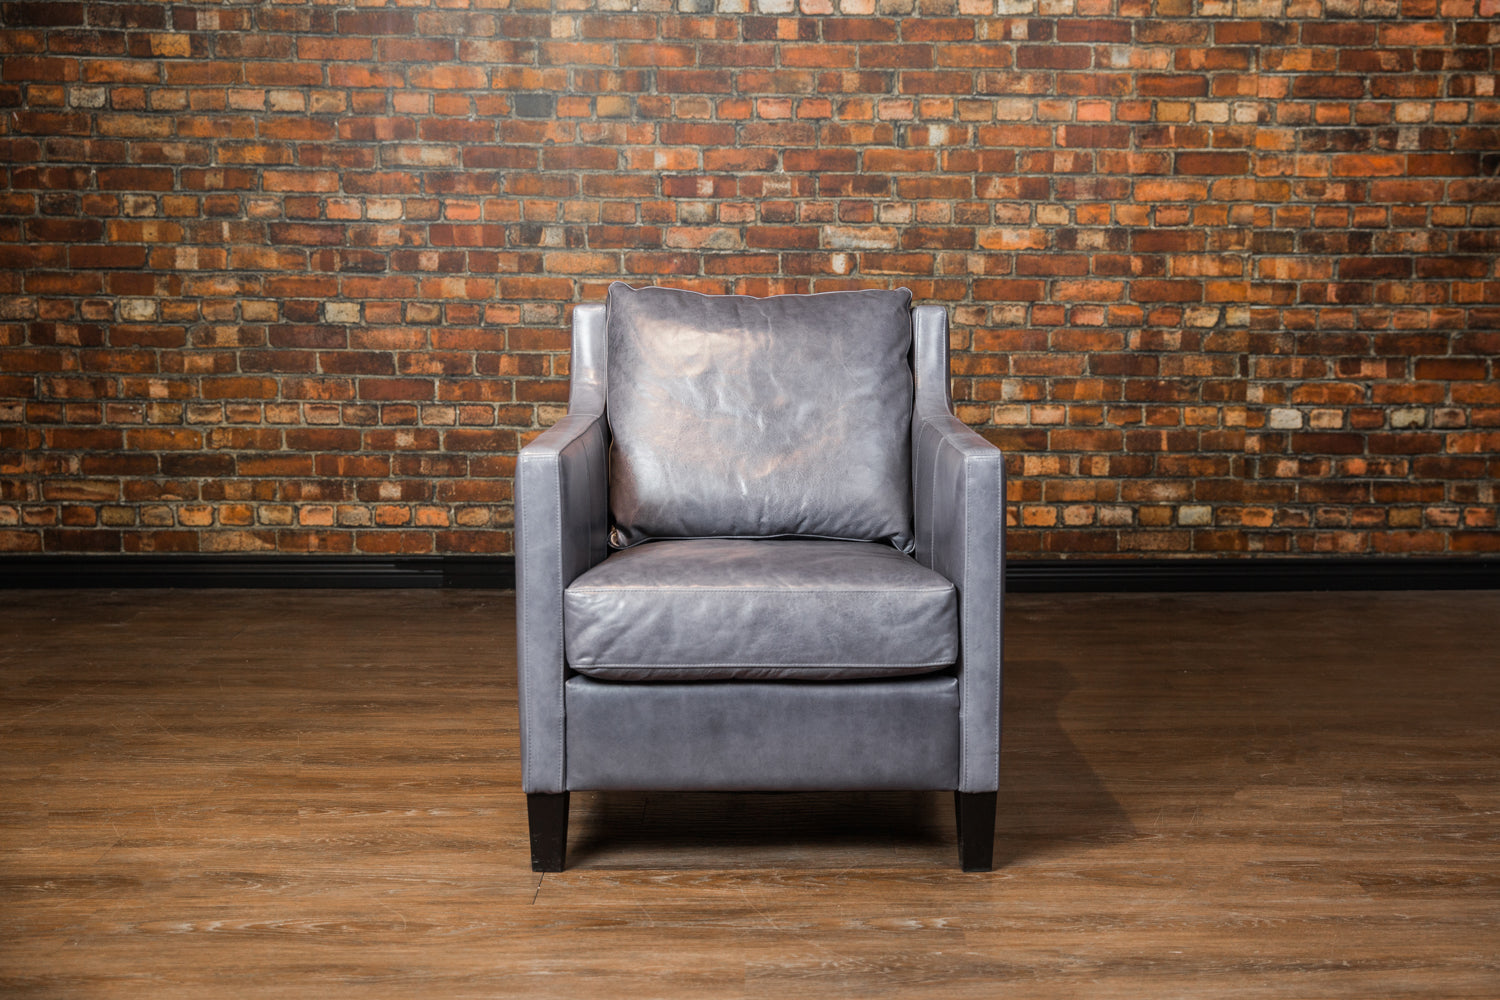 MANORWOOD PILLOW BACK LEATHER CHAIR